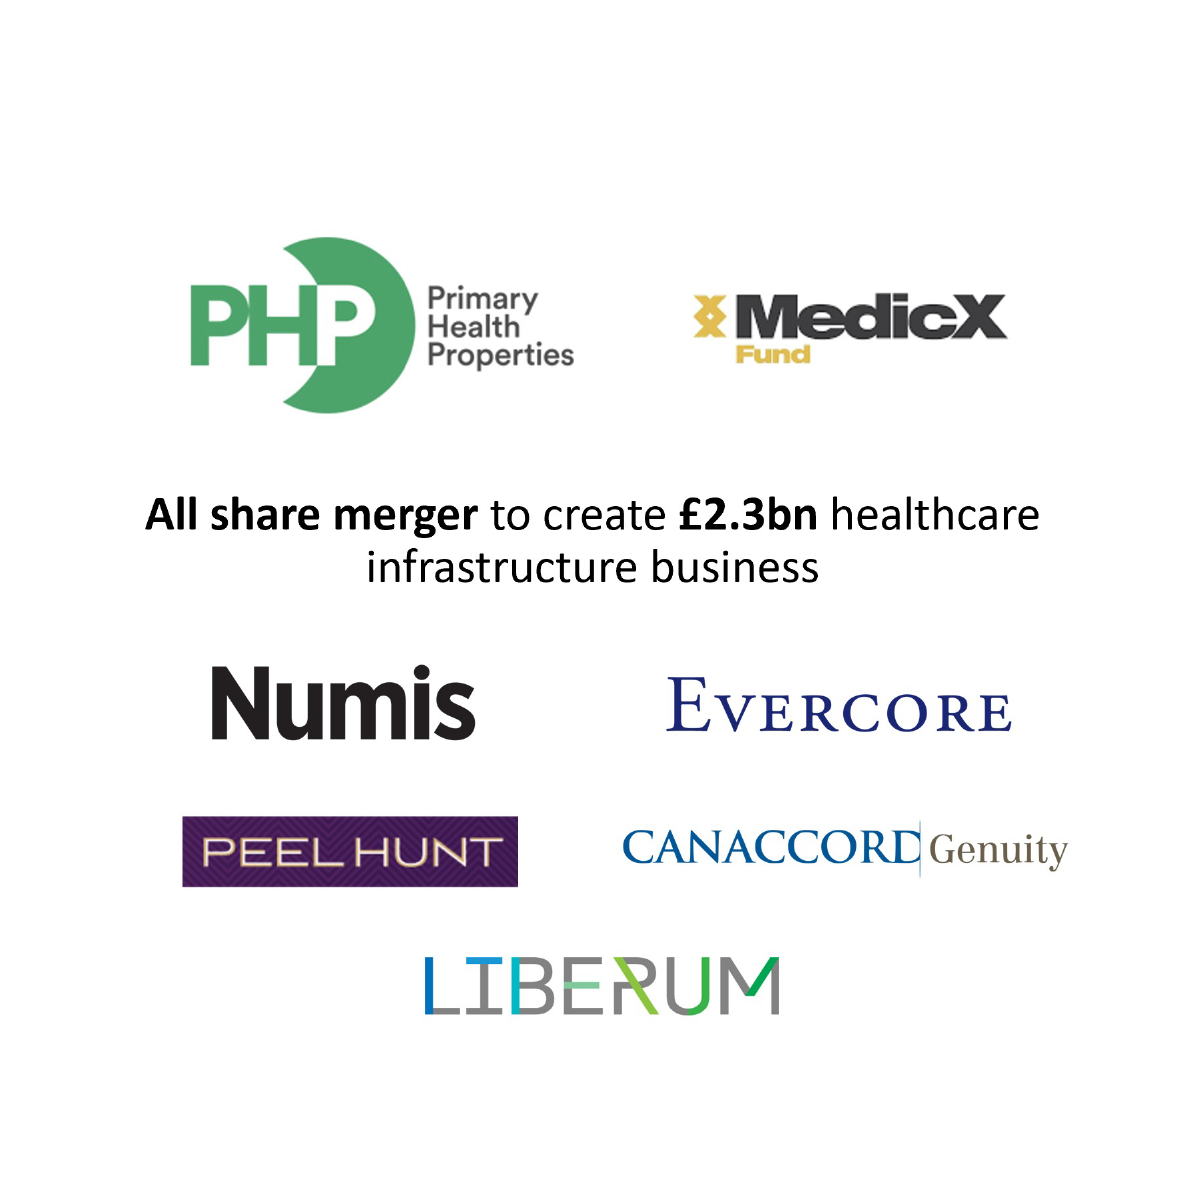 All share merger to create £2.3bn healthcare infrastructure business